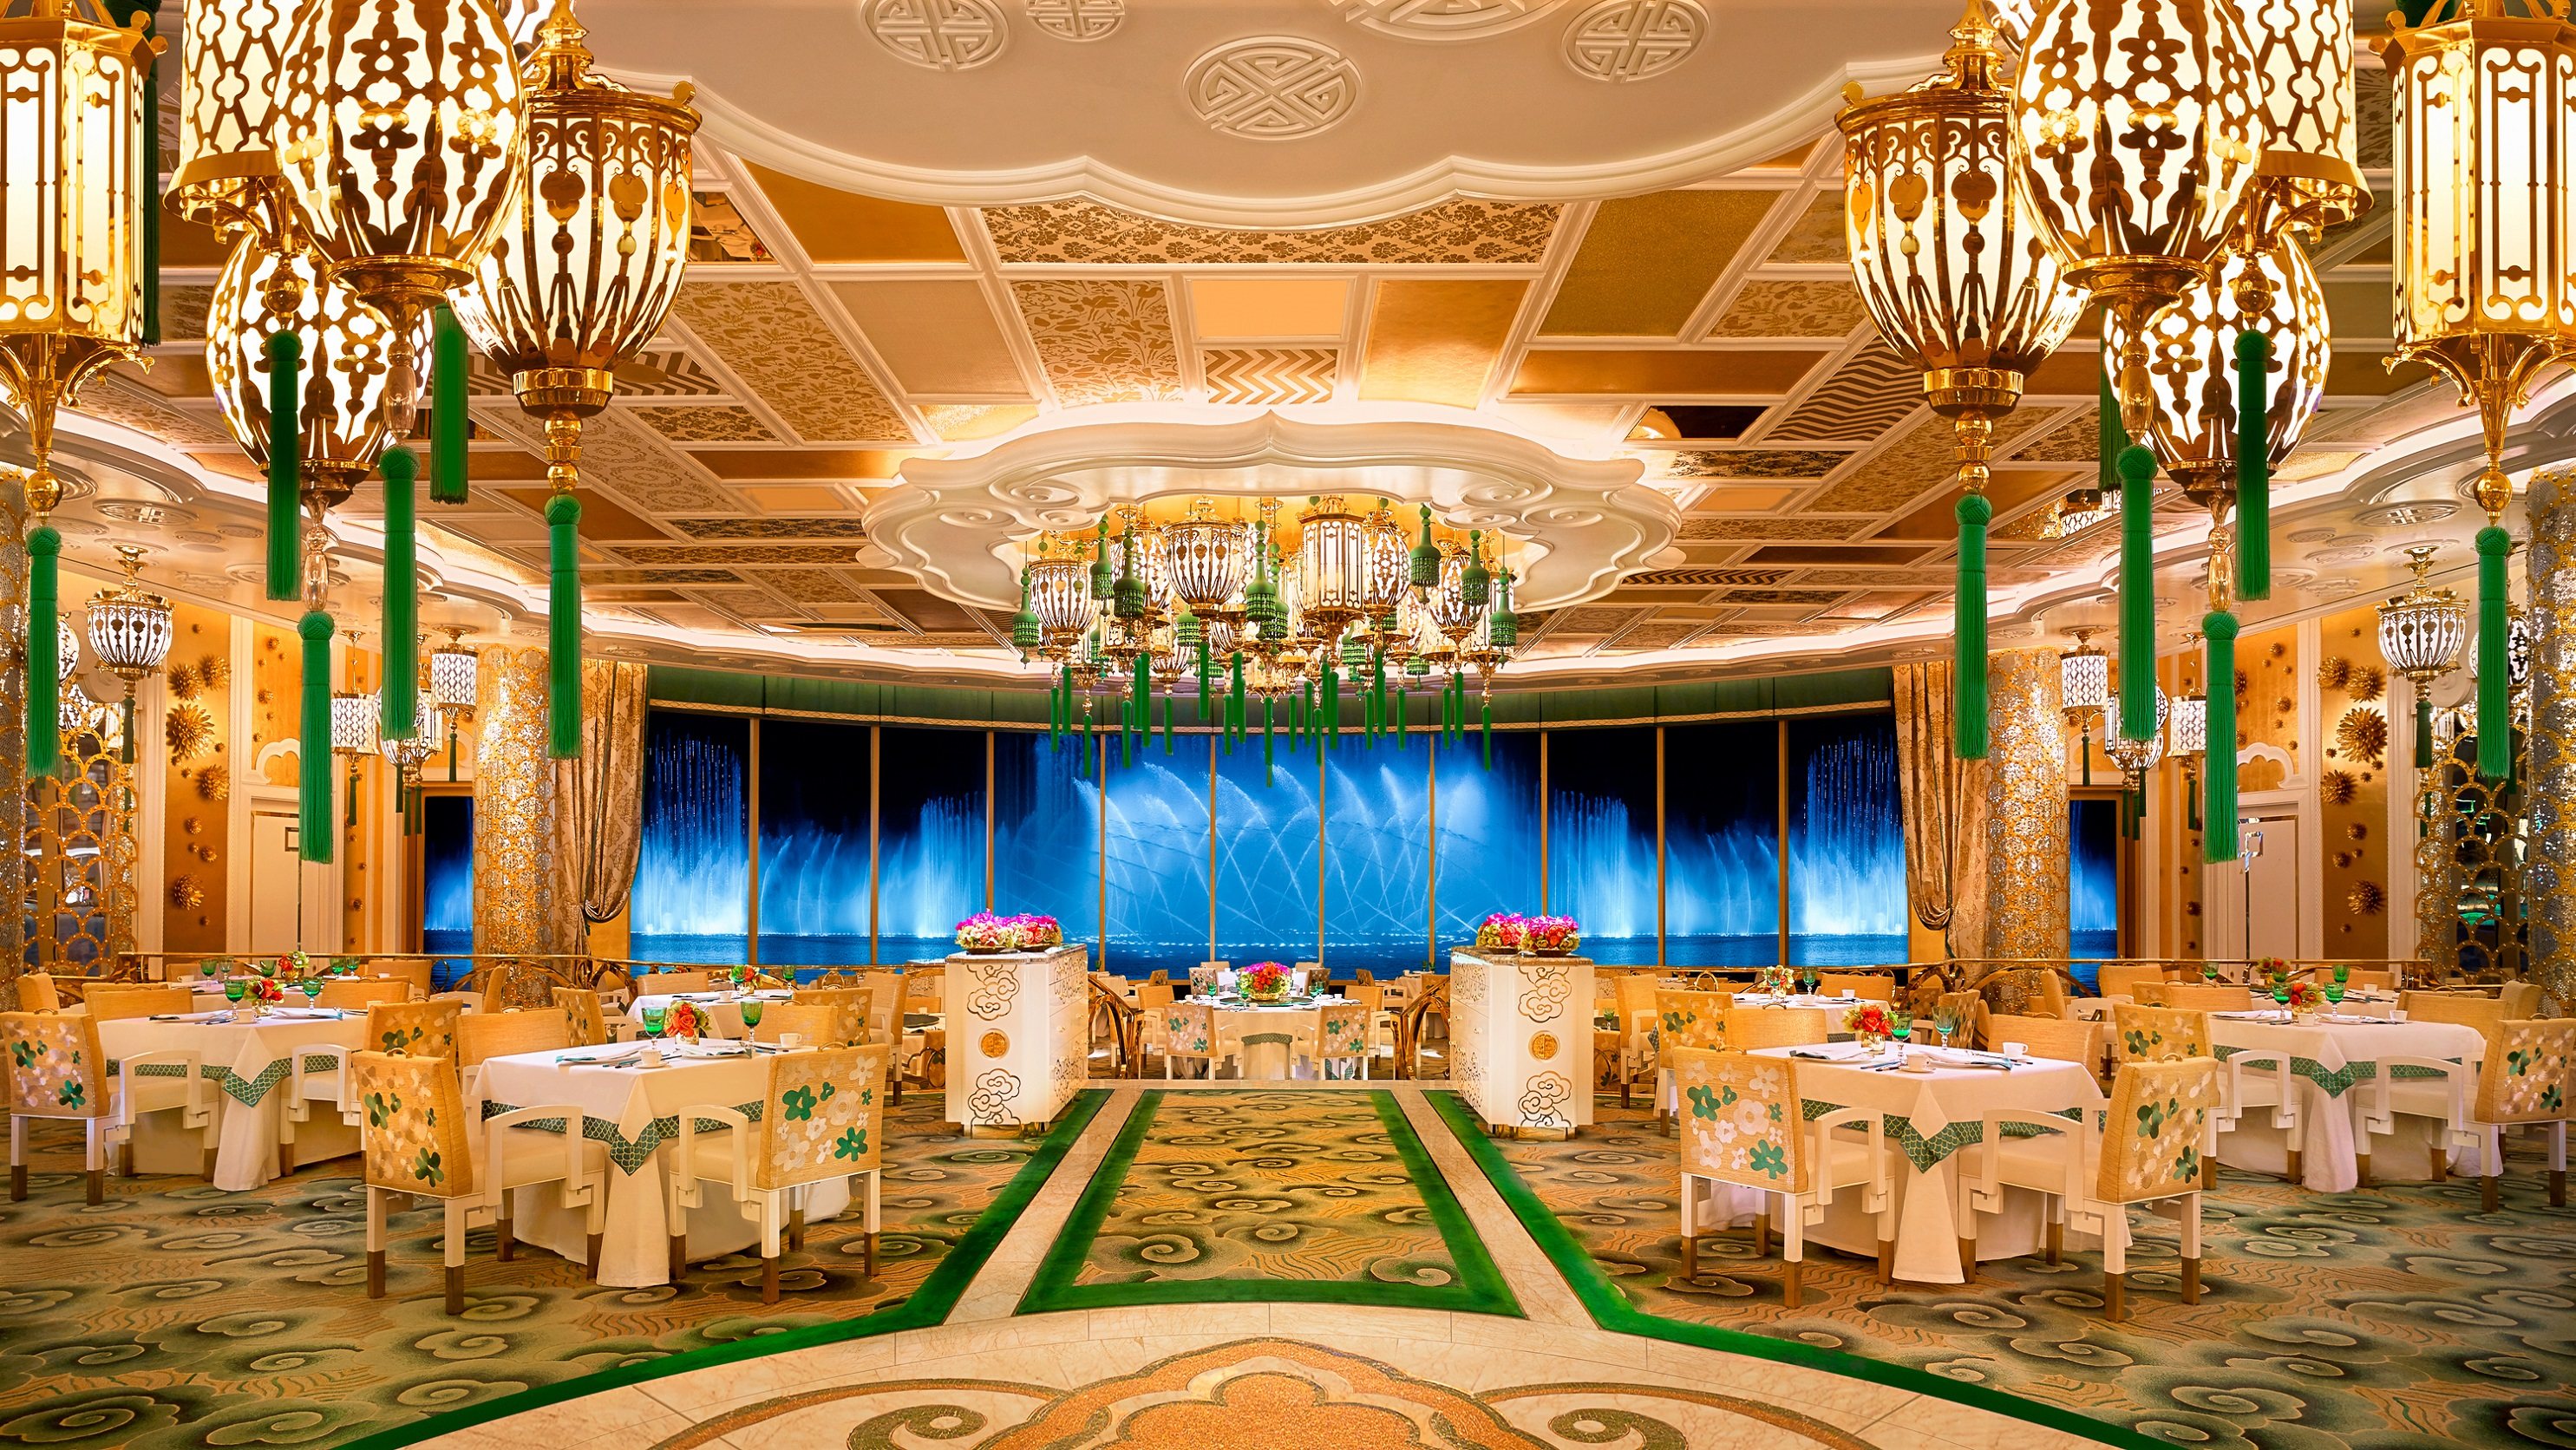 The glizty main dining room at Wing Lei Palace in Macau. Photo: Handout